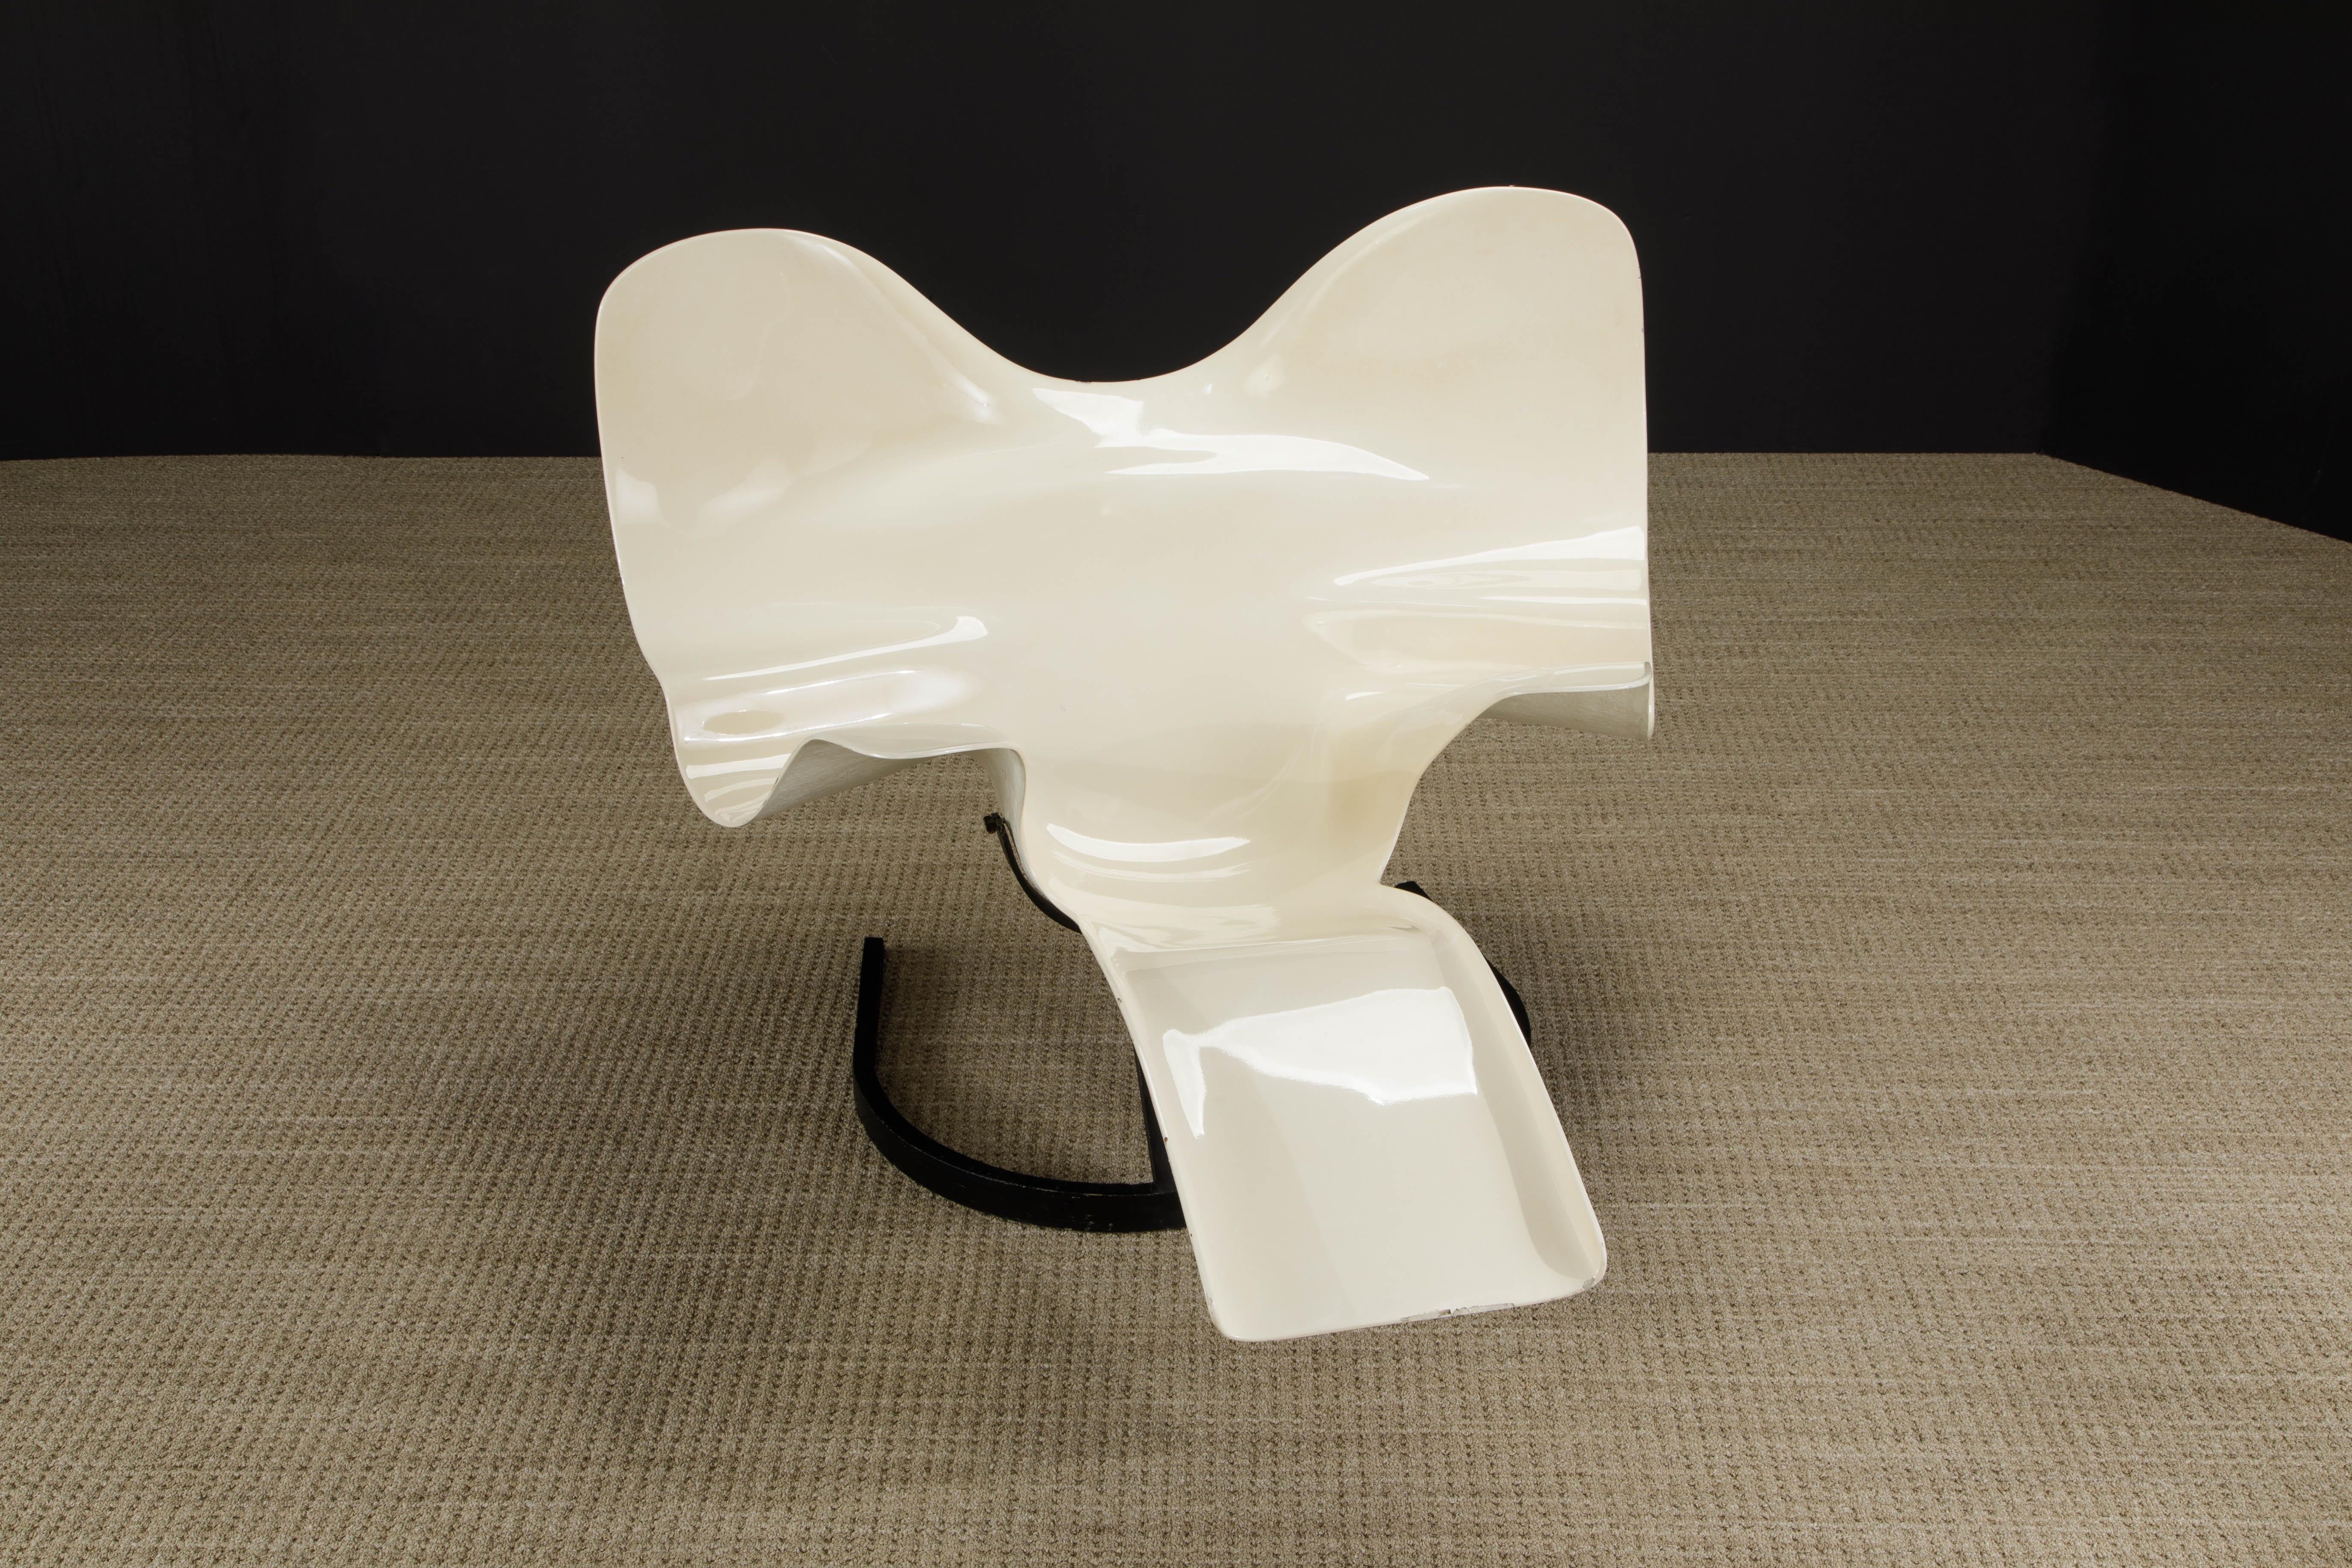 Enameled Limited Edition 'Elephant Chair' by Bernard Rancillac, 1985, Signed & Numbered